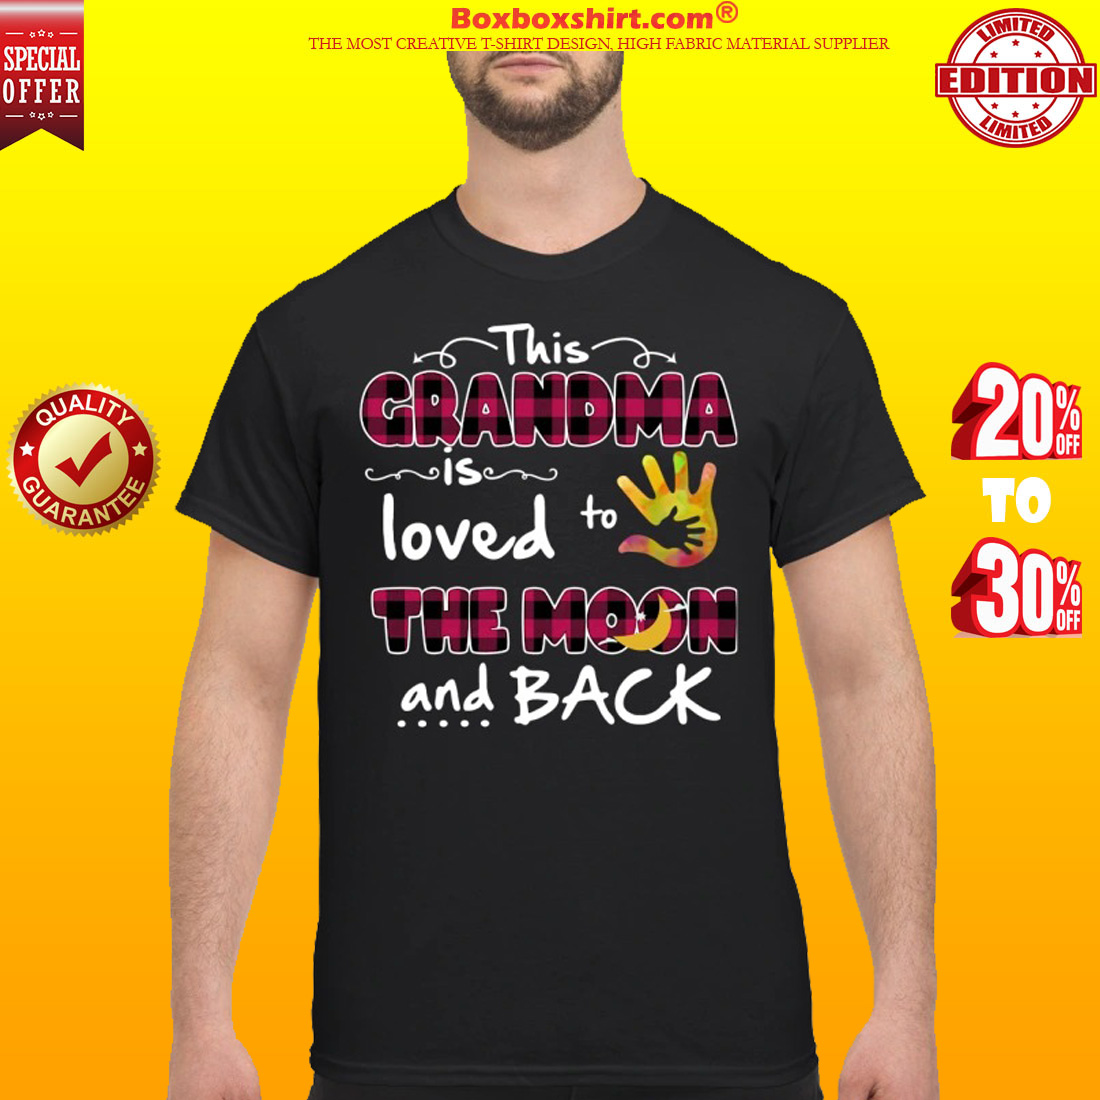 This grandma loved to the moon and back classic shirt